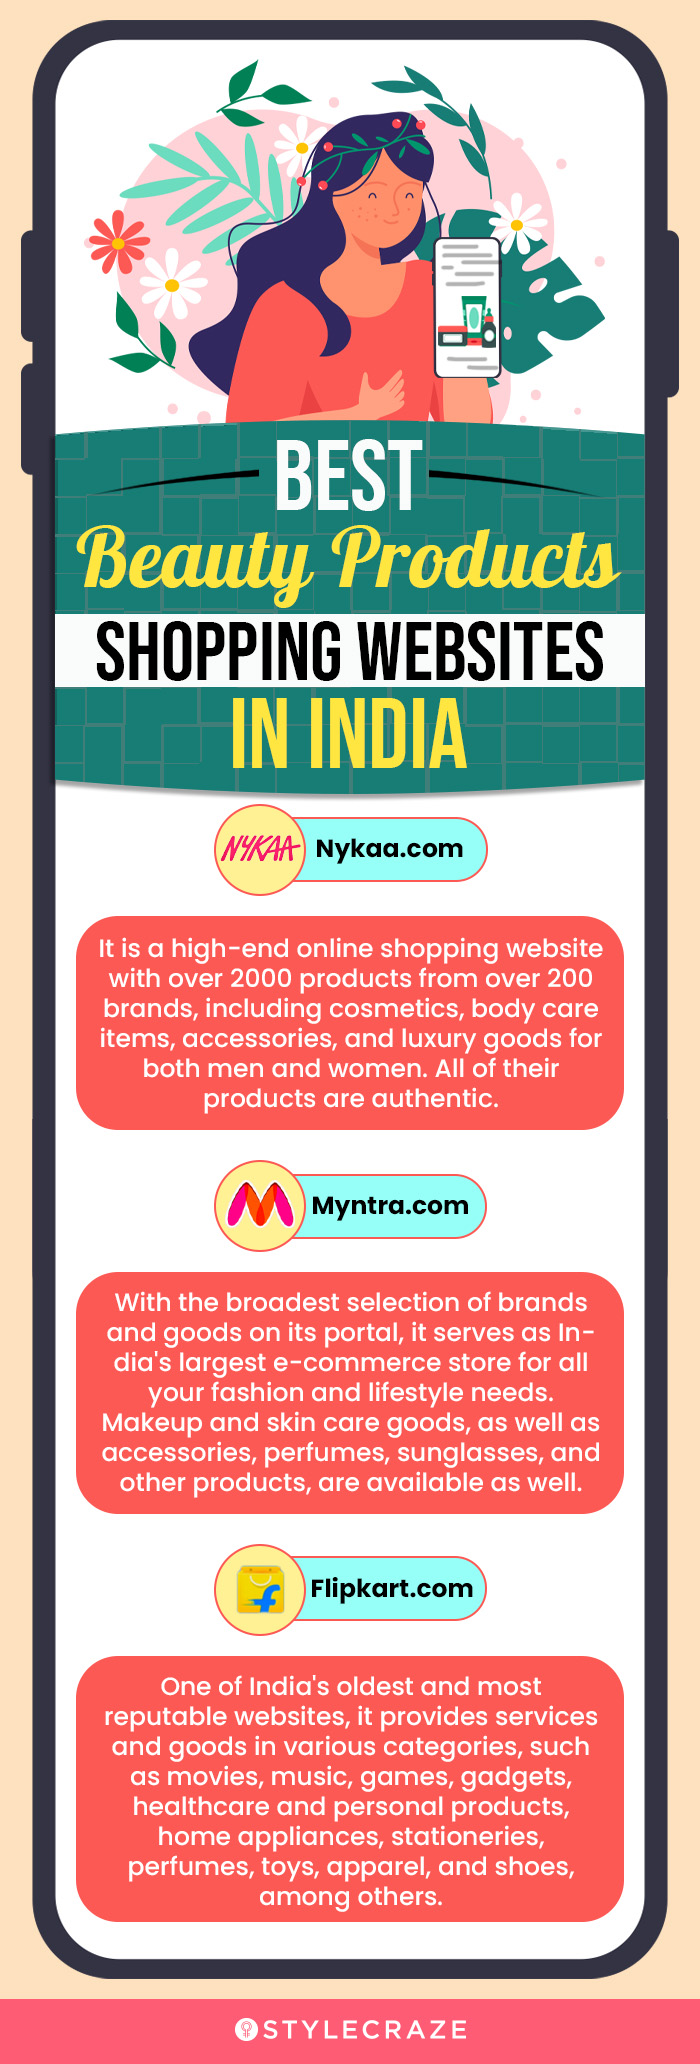 best beauty products shopping websites in india [infographic]